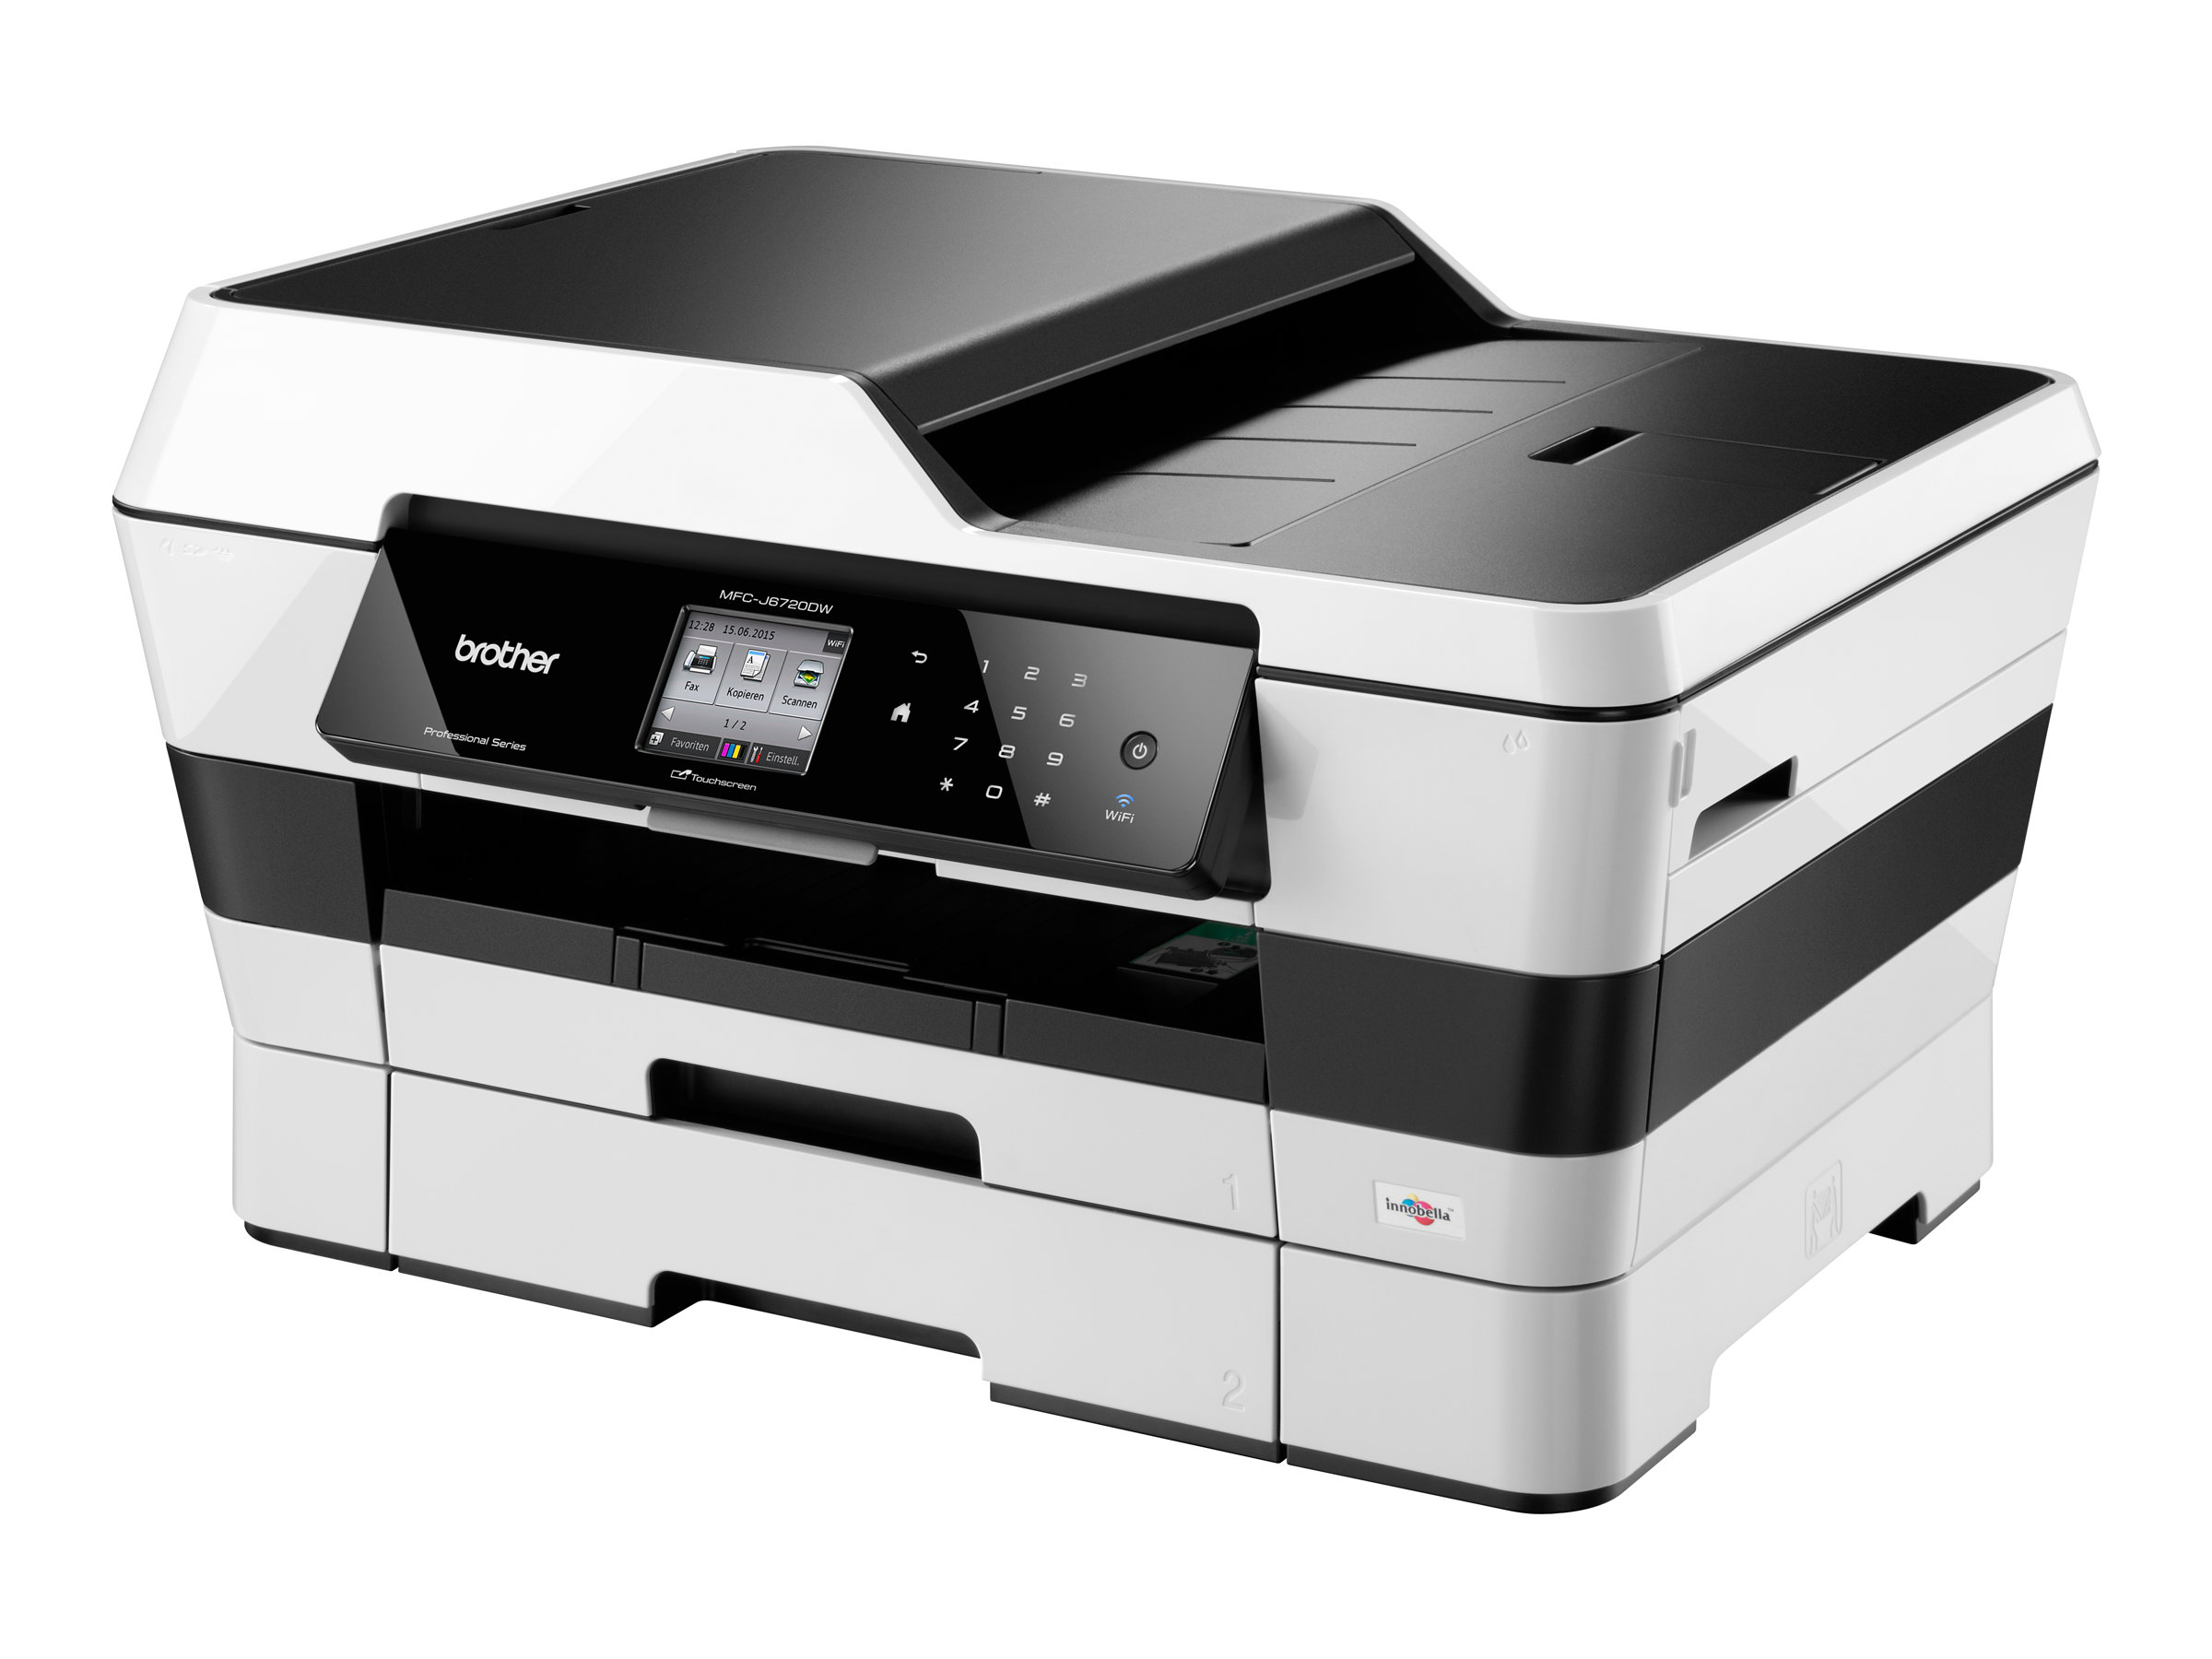 Brother MFC-J6720DW Wireless Inkjet Color Printer with Scanner, Copier and Fax - image 1 of 11